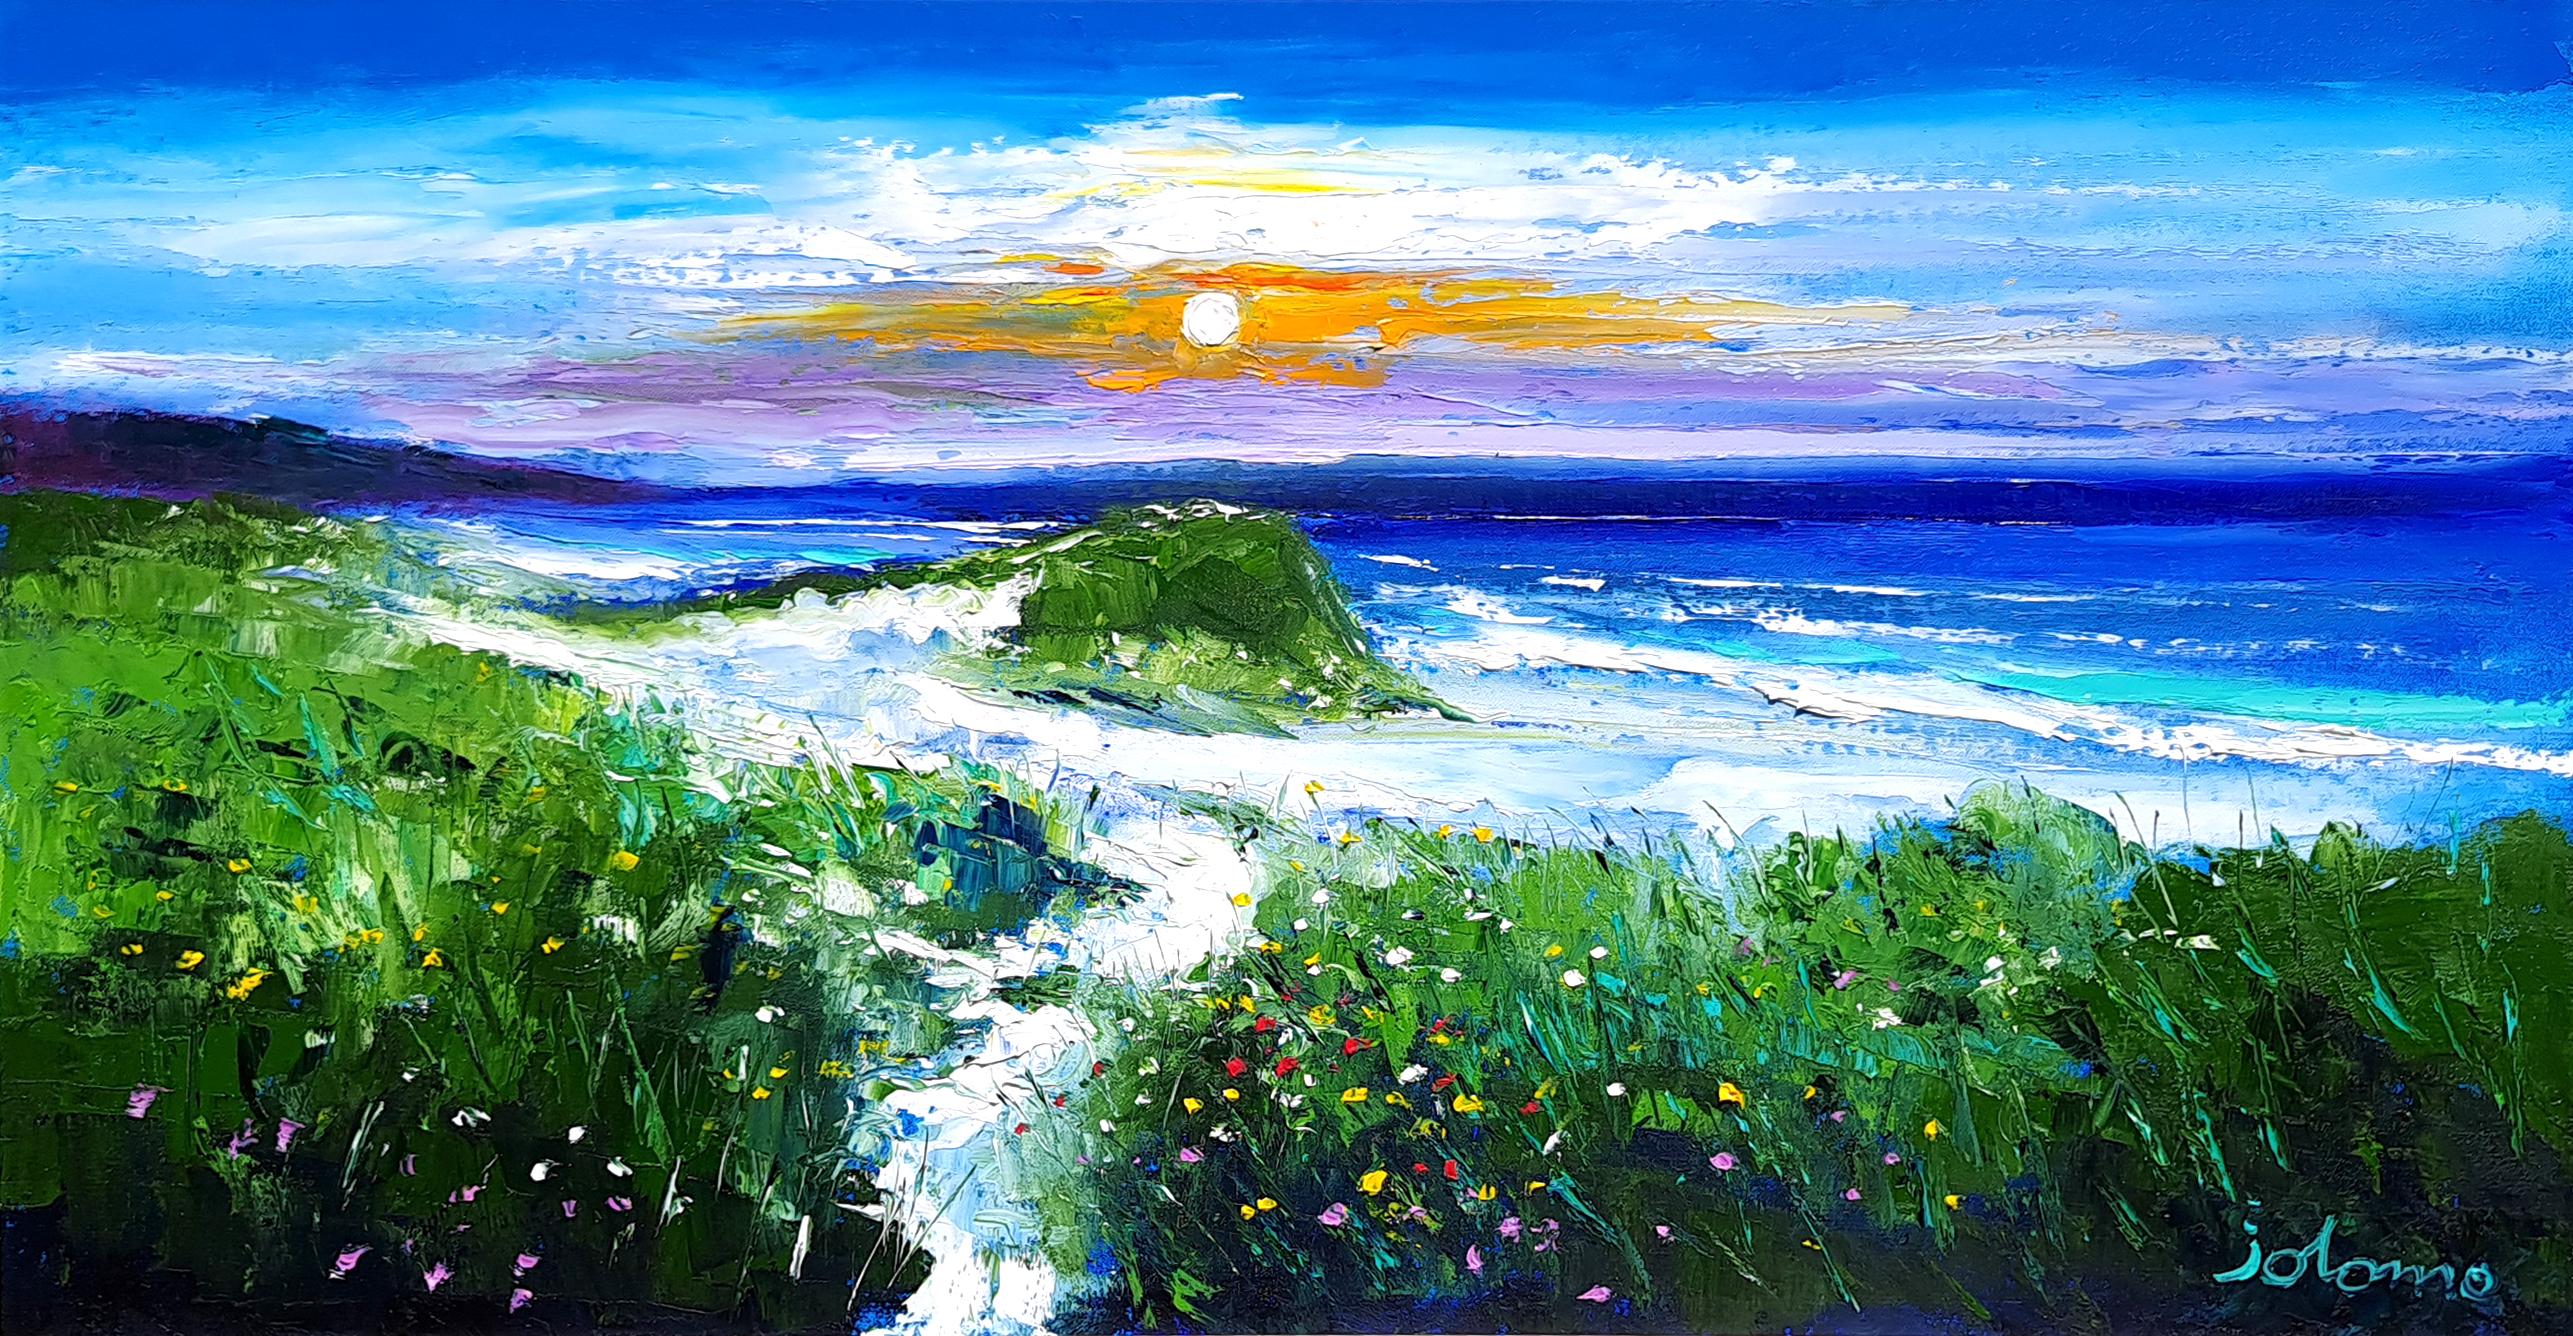 The Beach at Baleloch, North Uist - Painting by JOLOMO - John Lowrie Morrison OBE